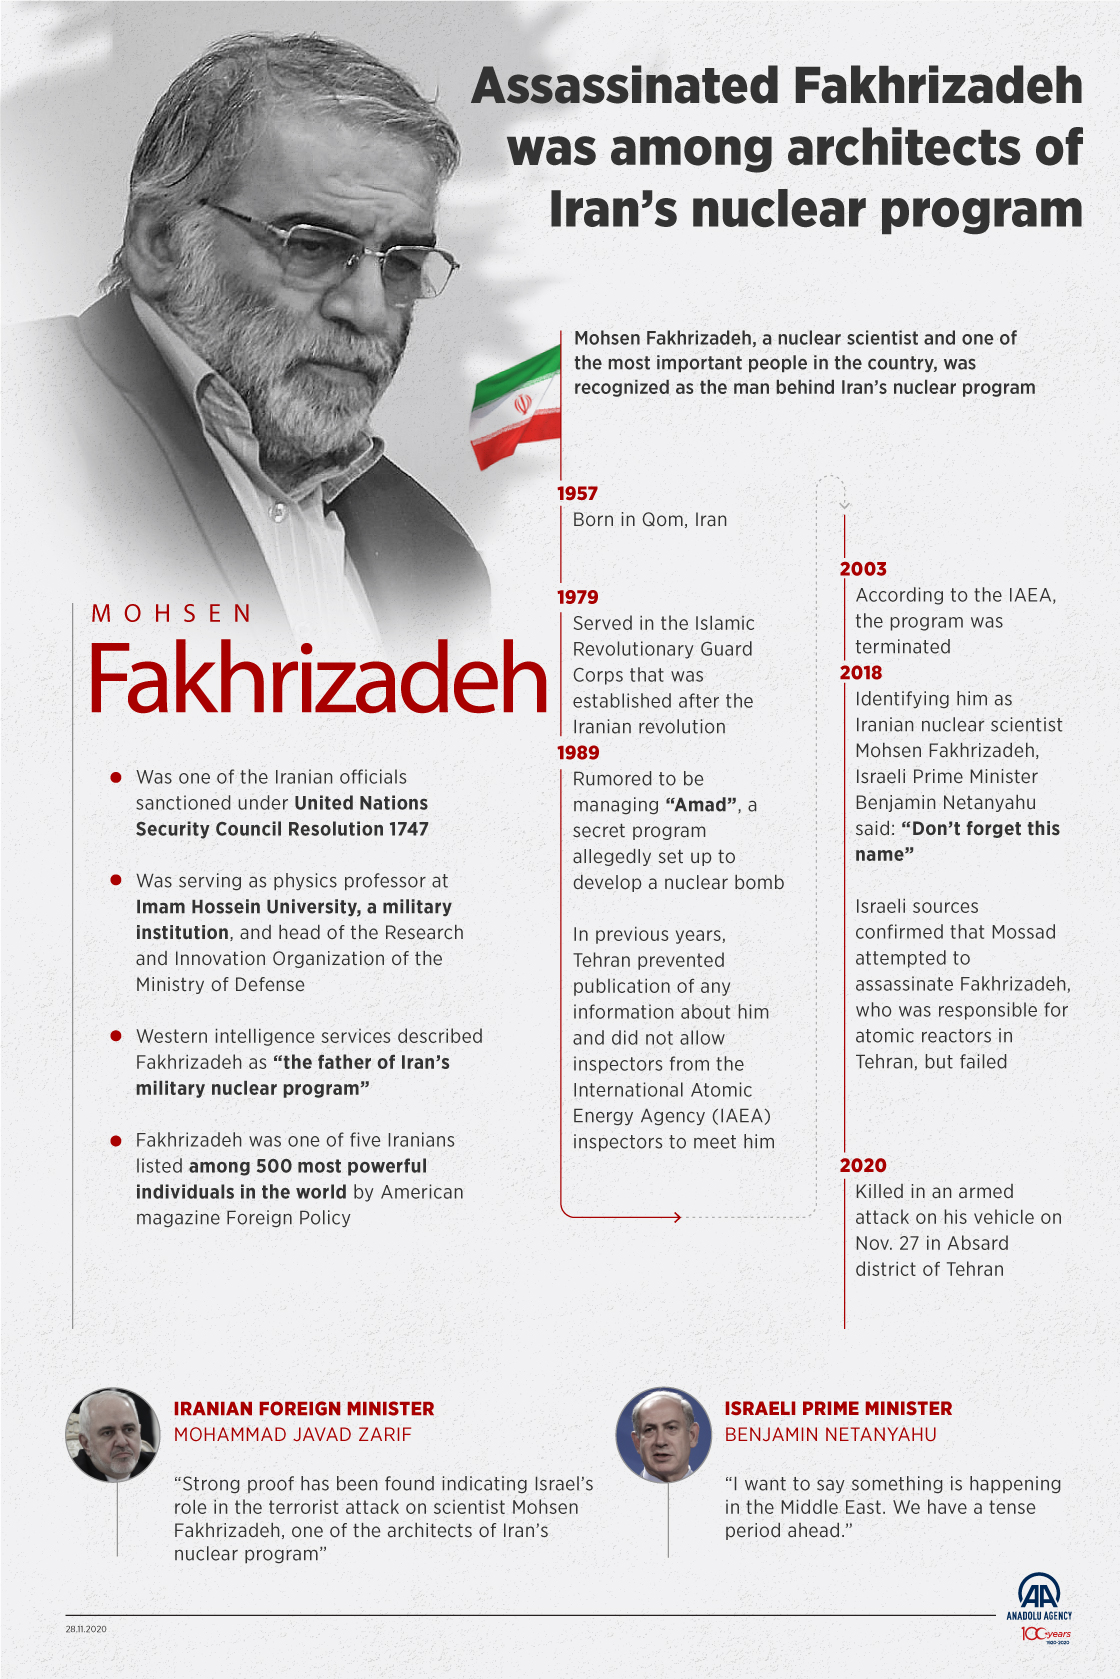 Assassinated Fakhrizadeh was among architects of Iran’s nuclear program